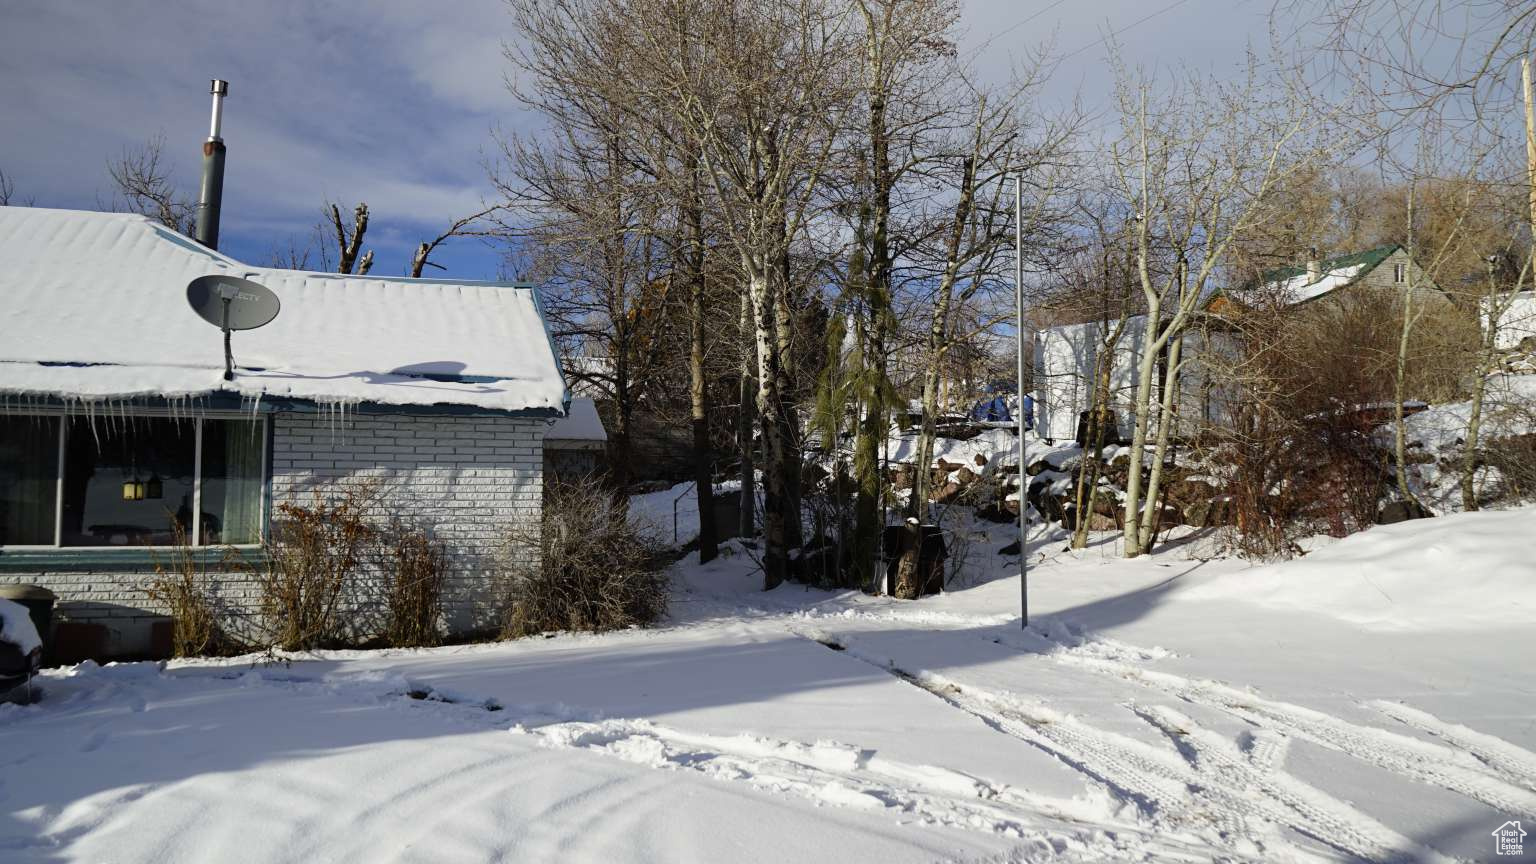 View of snow covered property